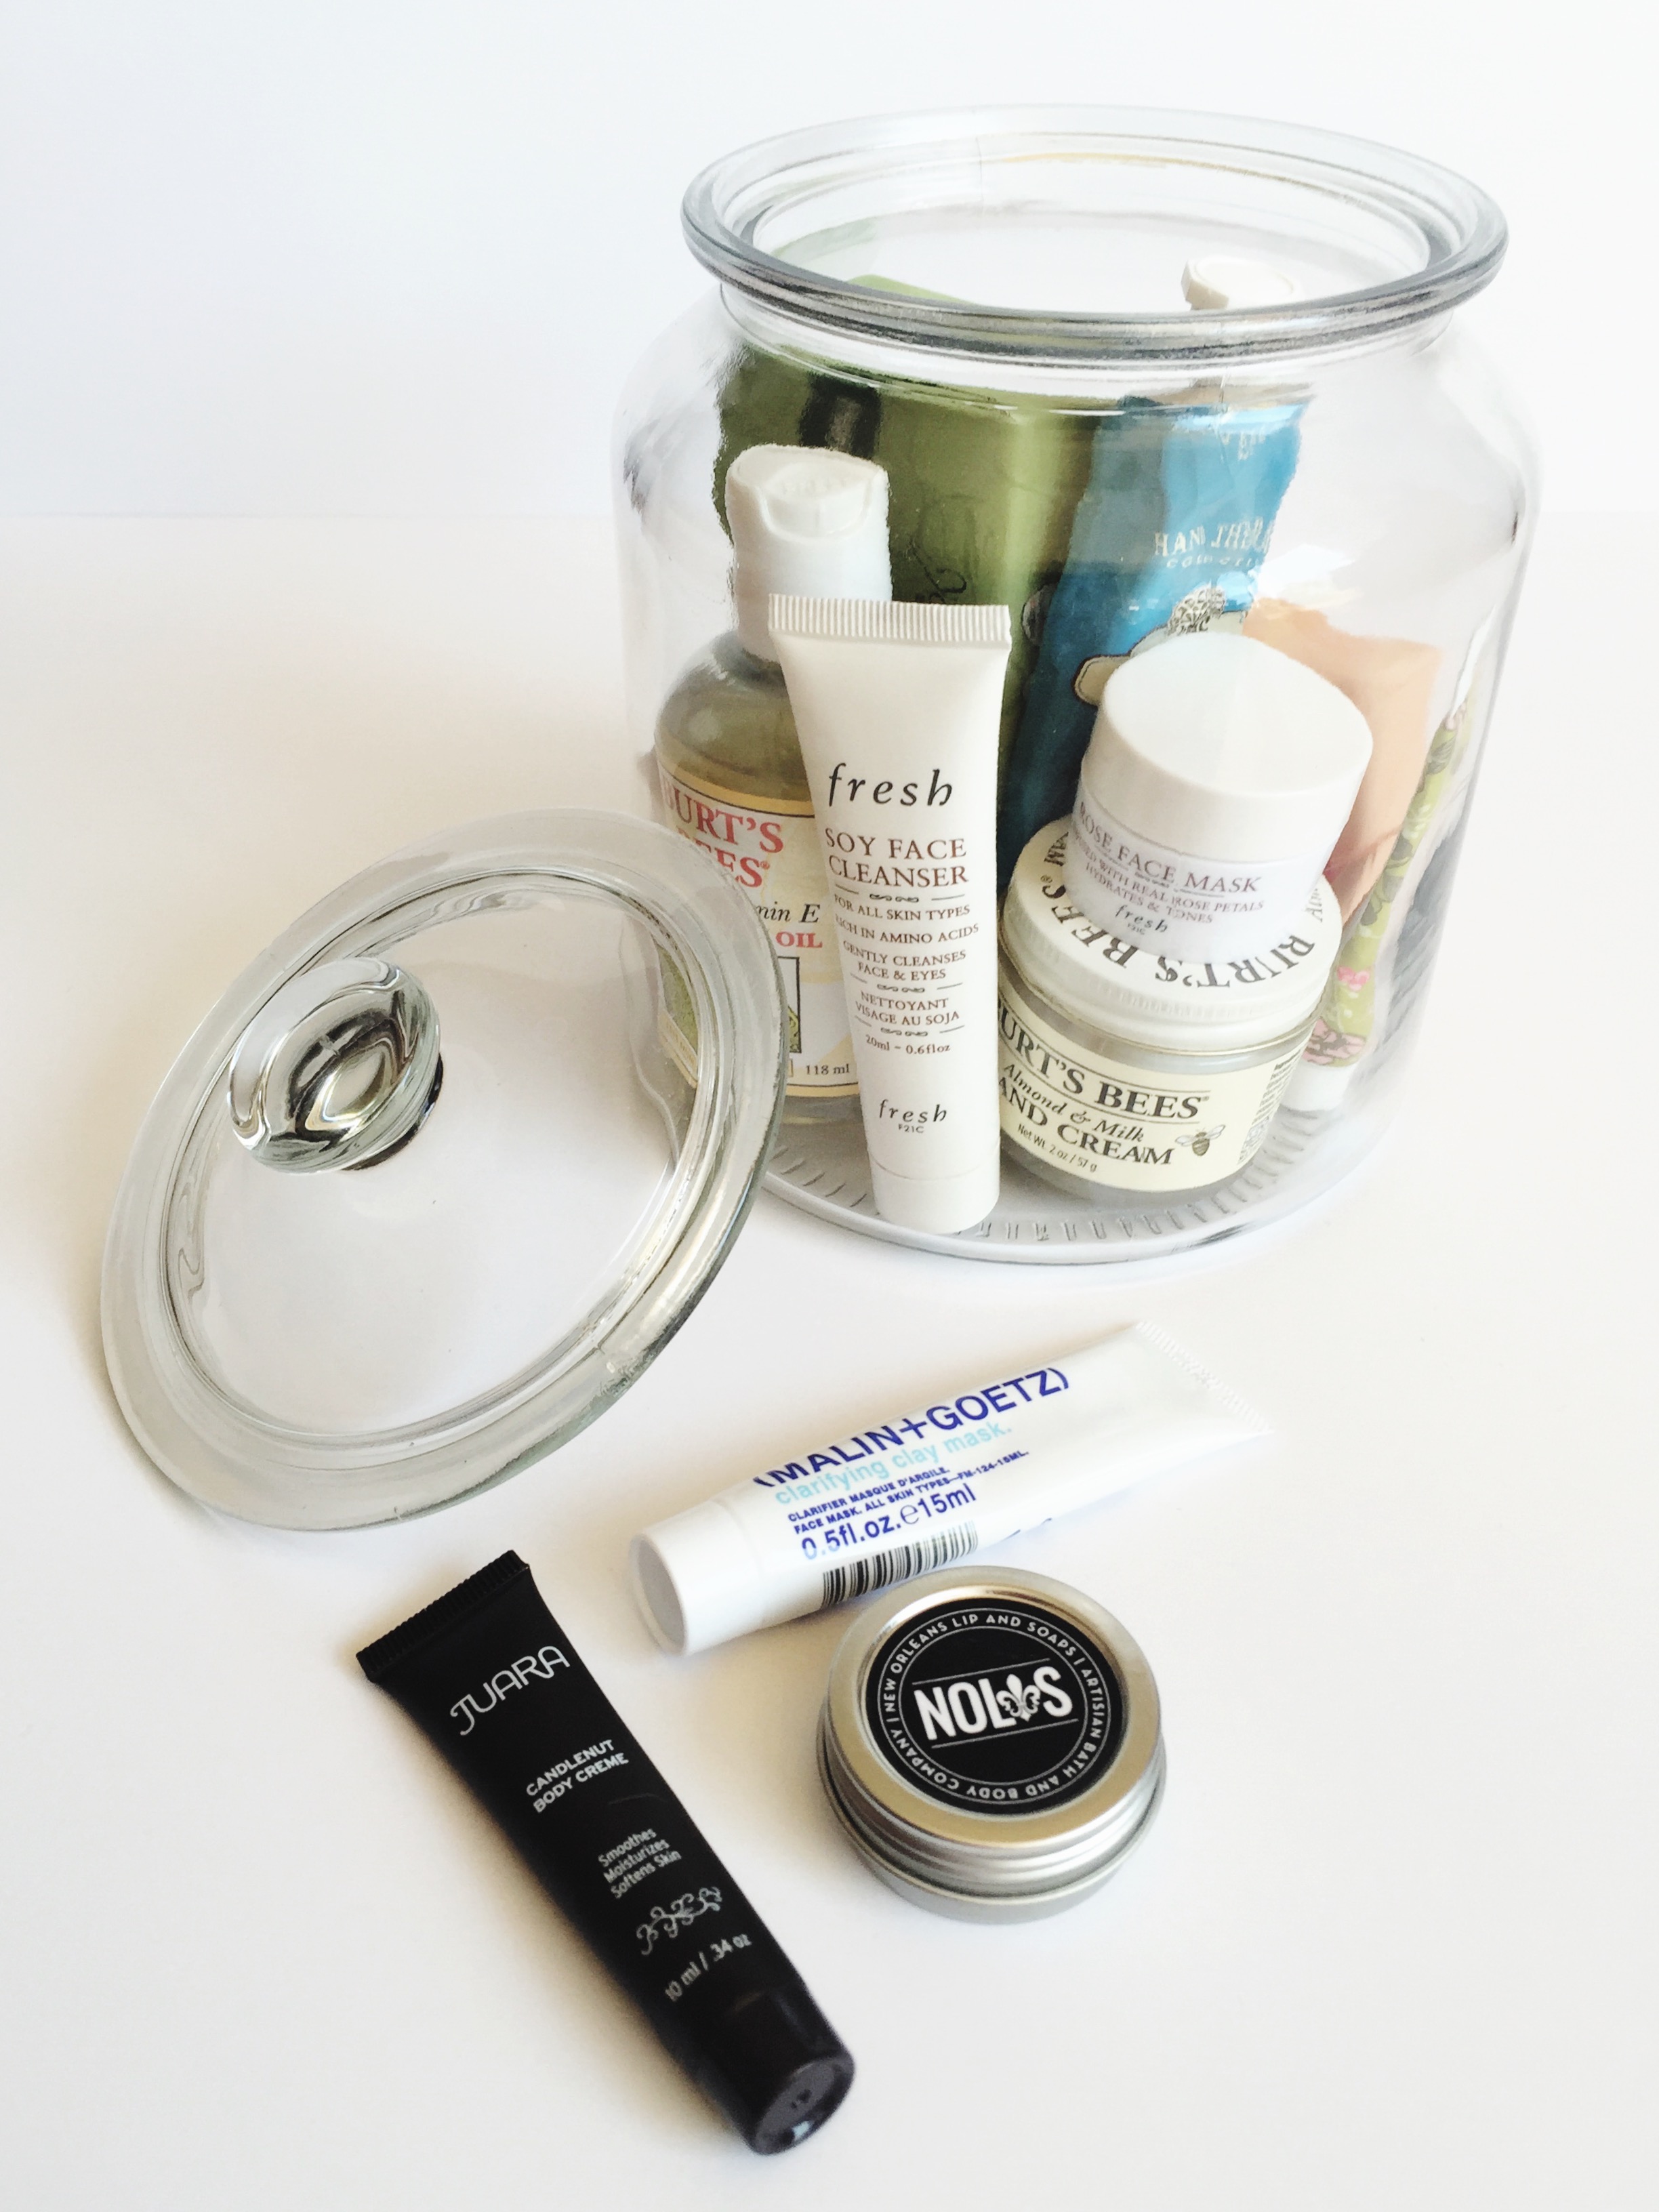 use a glass jar to corral small beauty products. it's both functional and pretty.